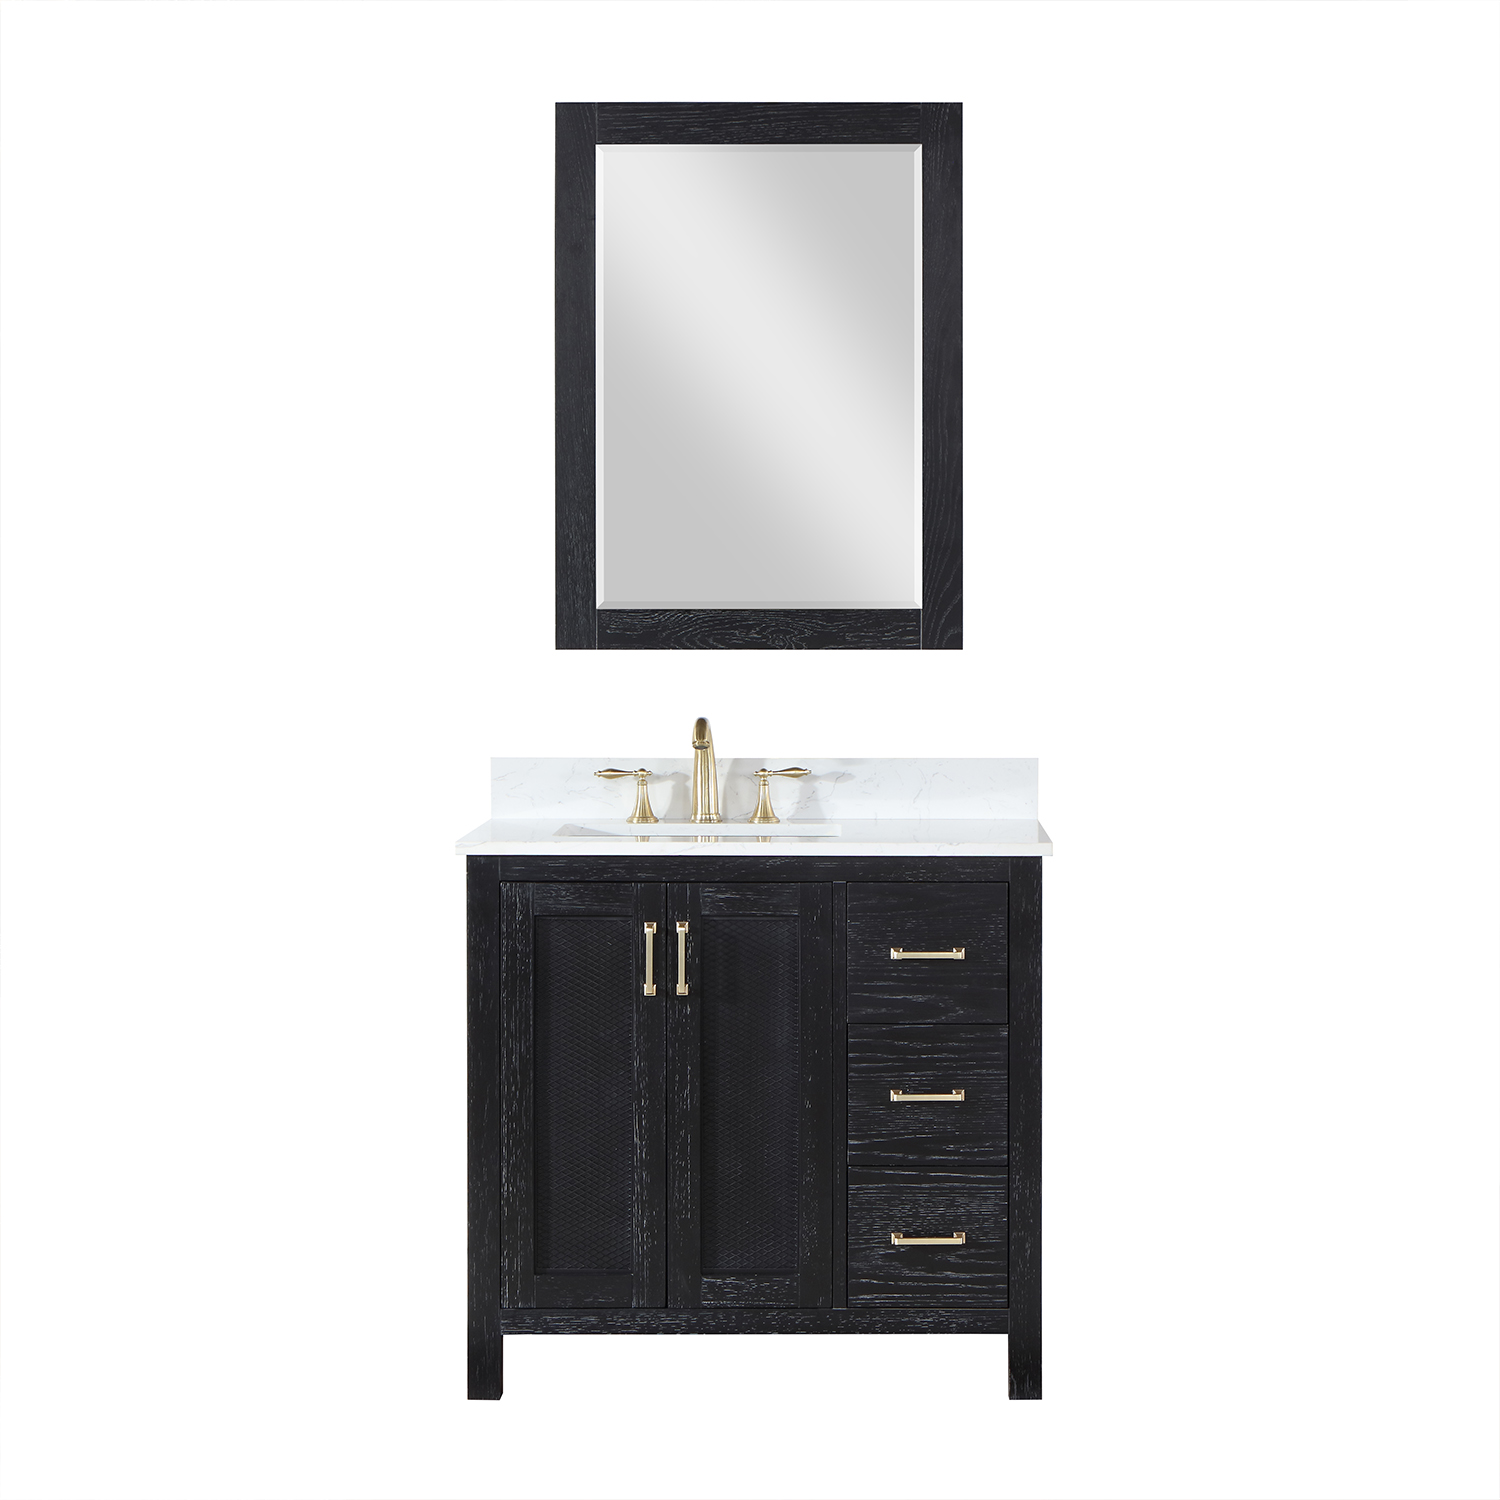 Issac Edwards Collection 36" Single Bathroom Vanity Set in Black Oak with Carrara White Composite Stone Countertop with Mirror 